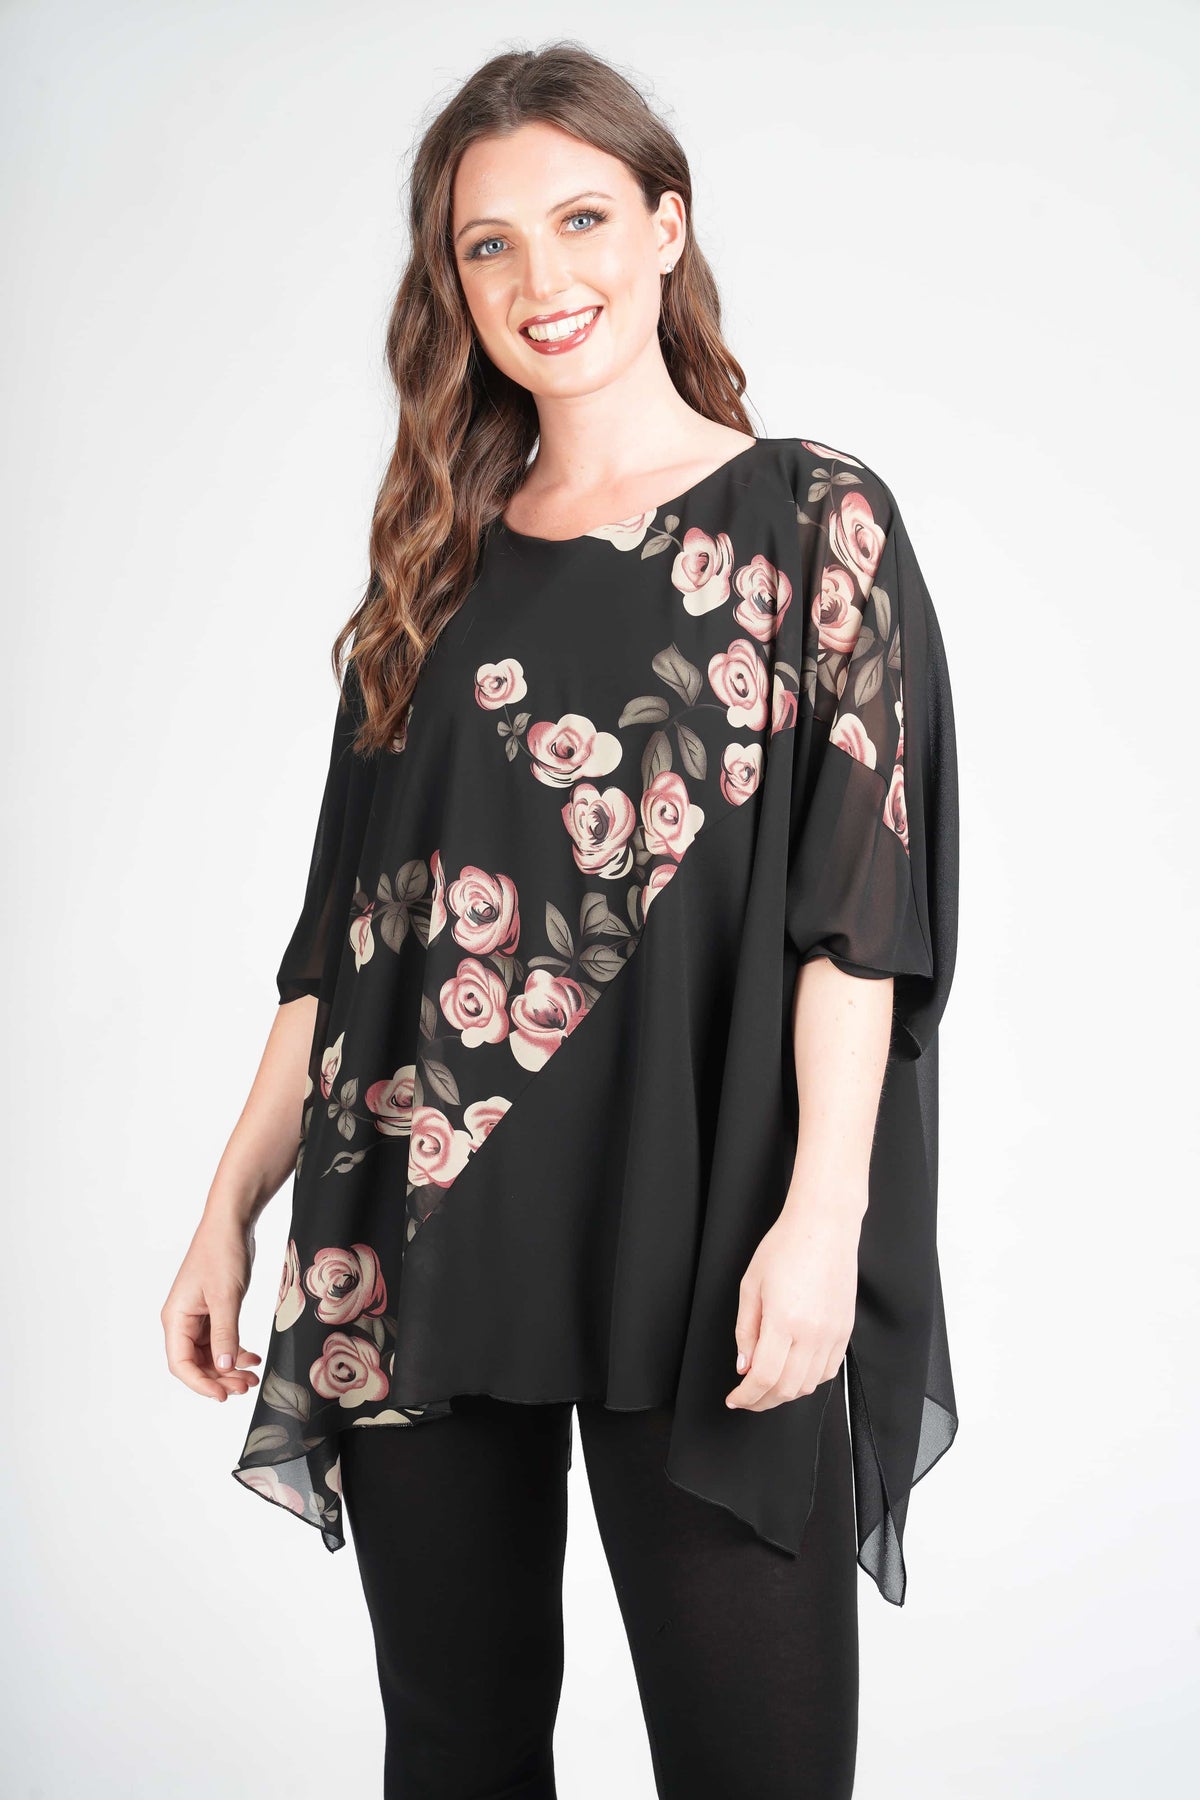 Saloos Top Dusky Pink / 12 Floral Chiffon Cape Top with Necklace